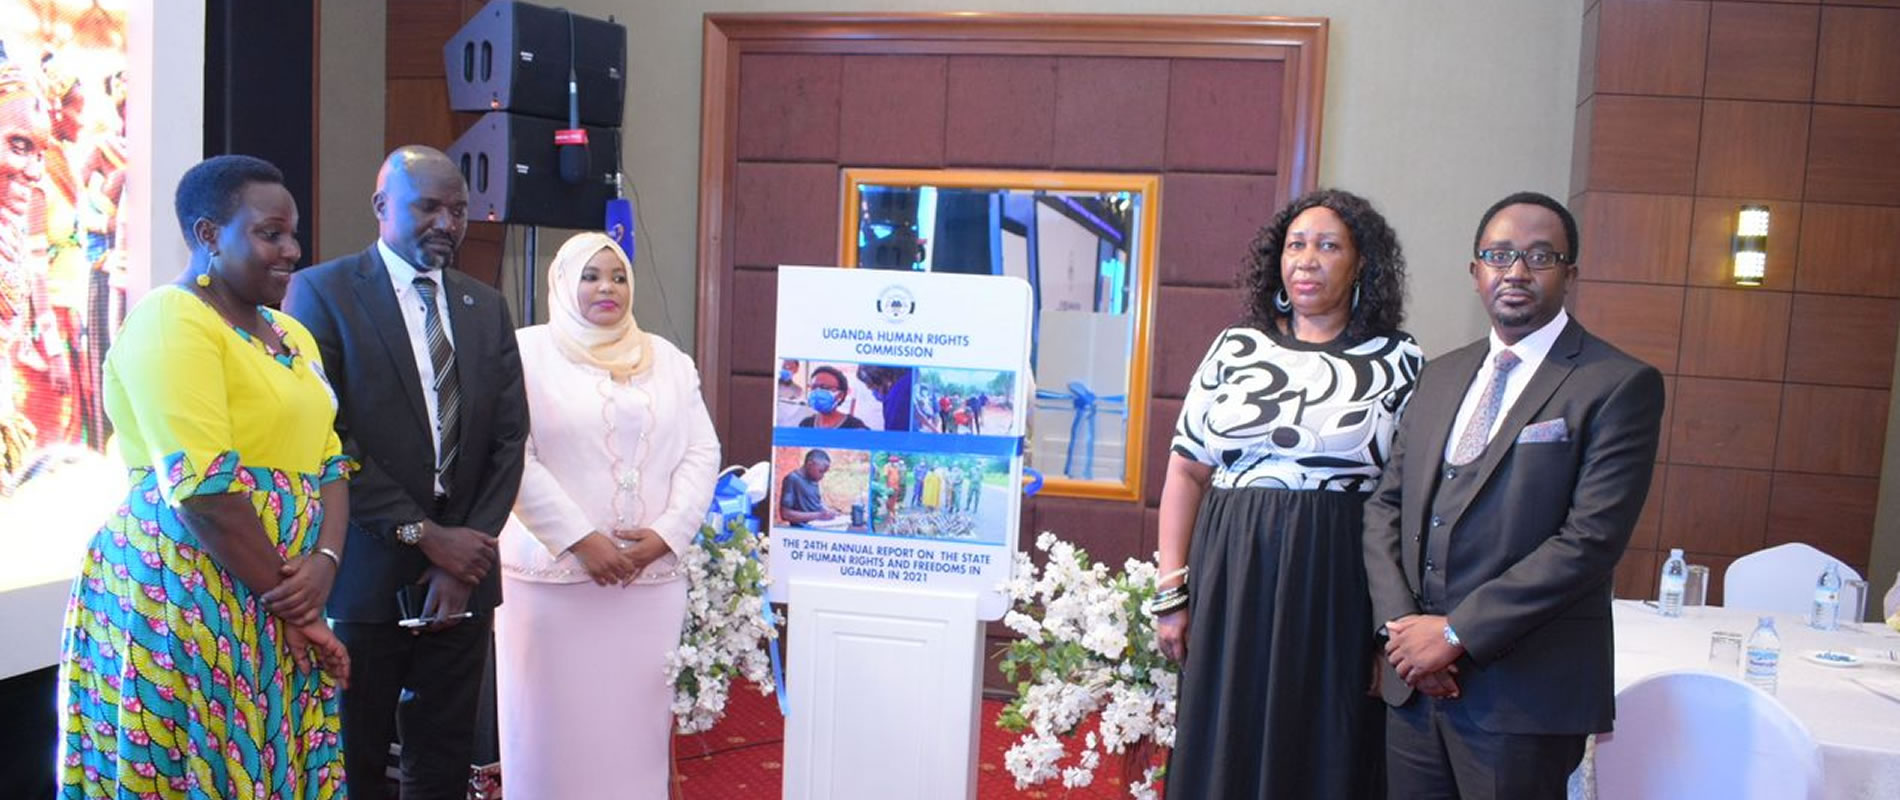 The Chairperson UHRC Mariam Wangadya and members of the Commission after the launch of the 24th Annual Report on the state of Rights and freedoms in Uganda in 2021.